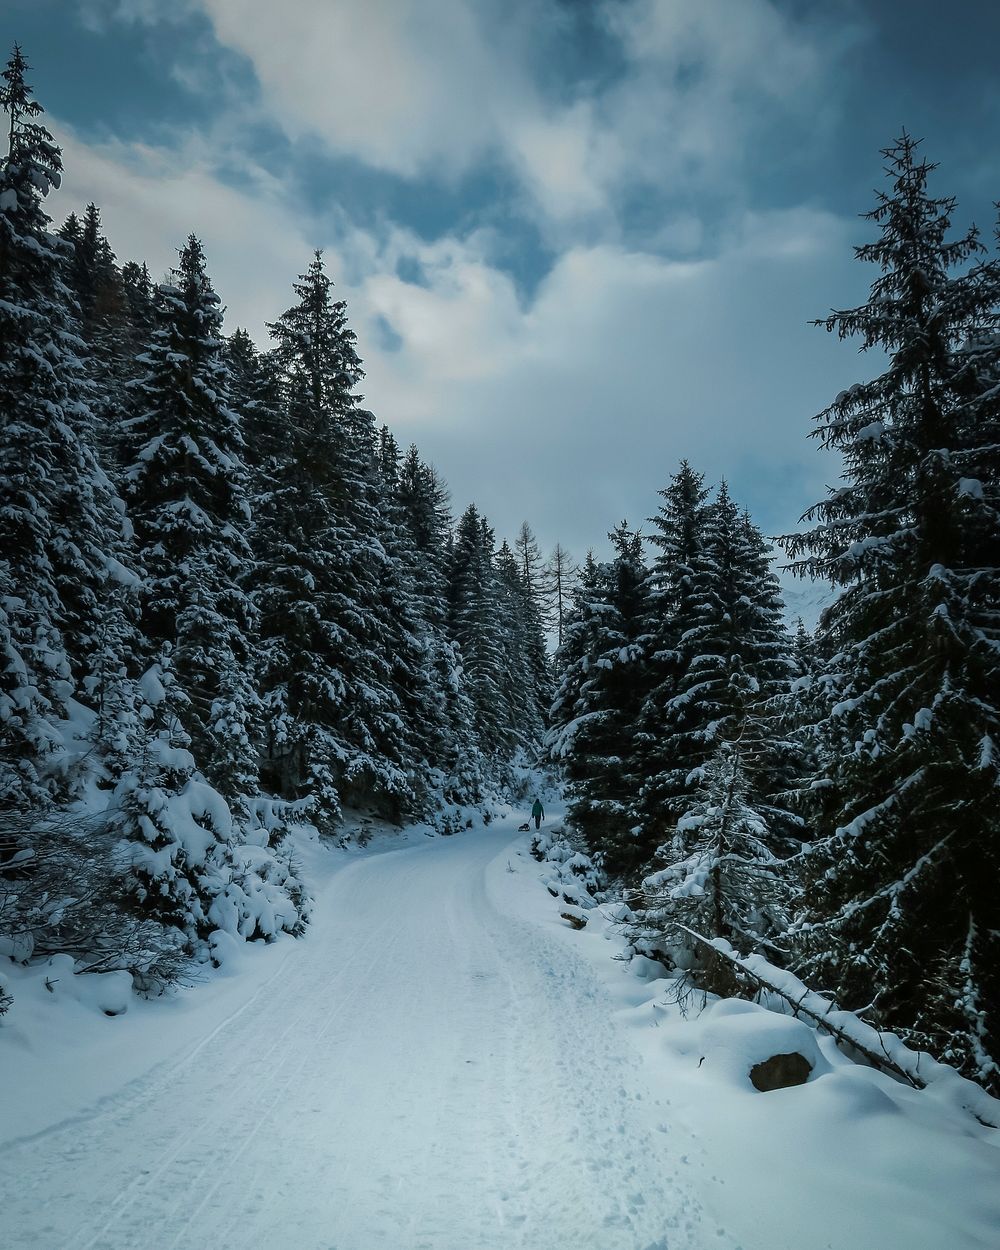 A distant shot of a person walking on a snowy trail through a forest. Original public domain image from Wikimedia Commons